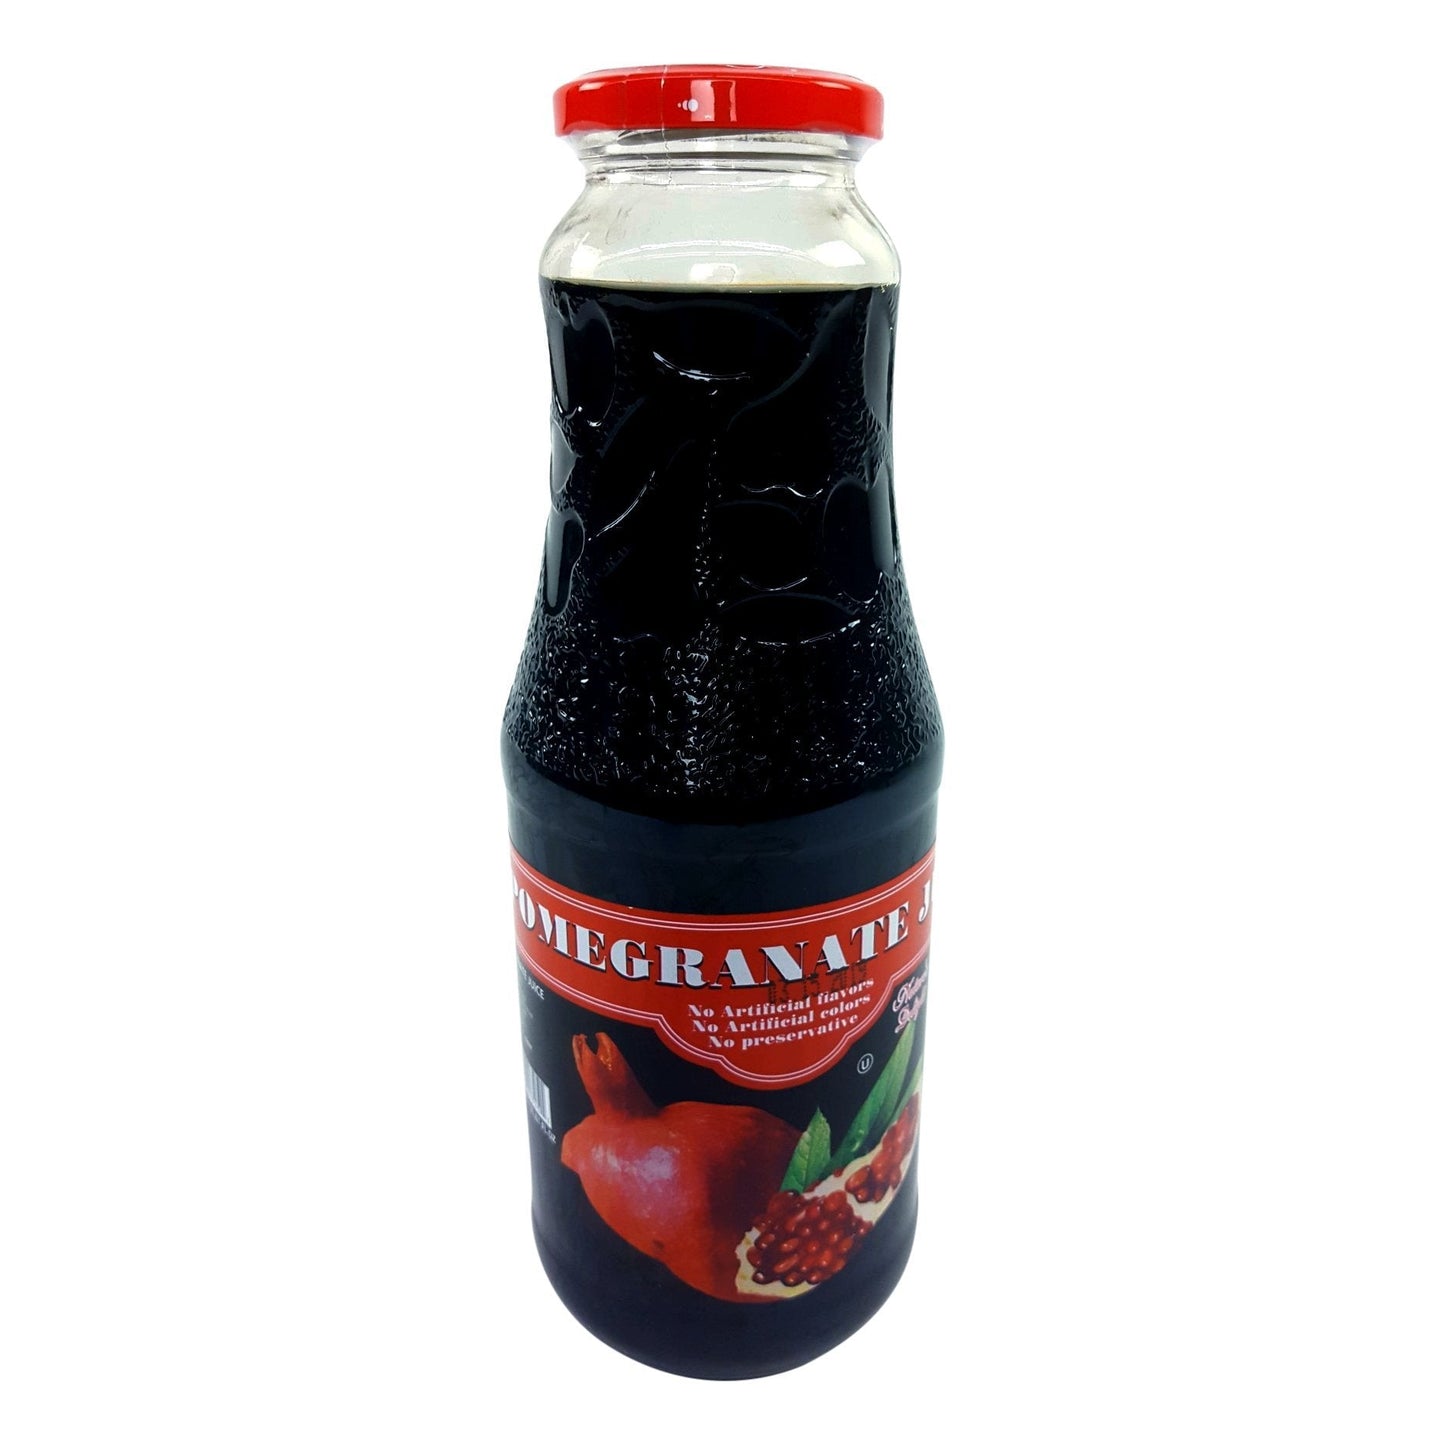 Pomegranate Juice 8/1 LT (FOR PICK UP OR LOCAL DELIVERY ONLY)